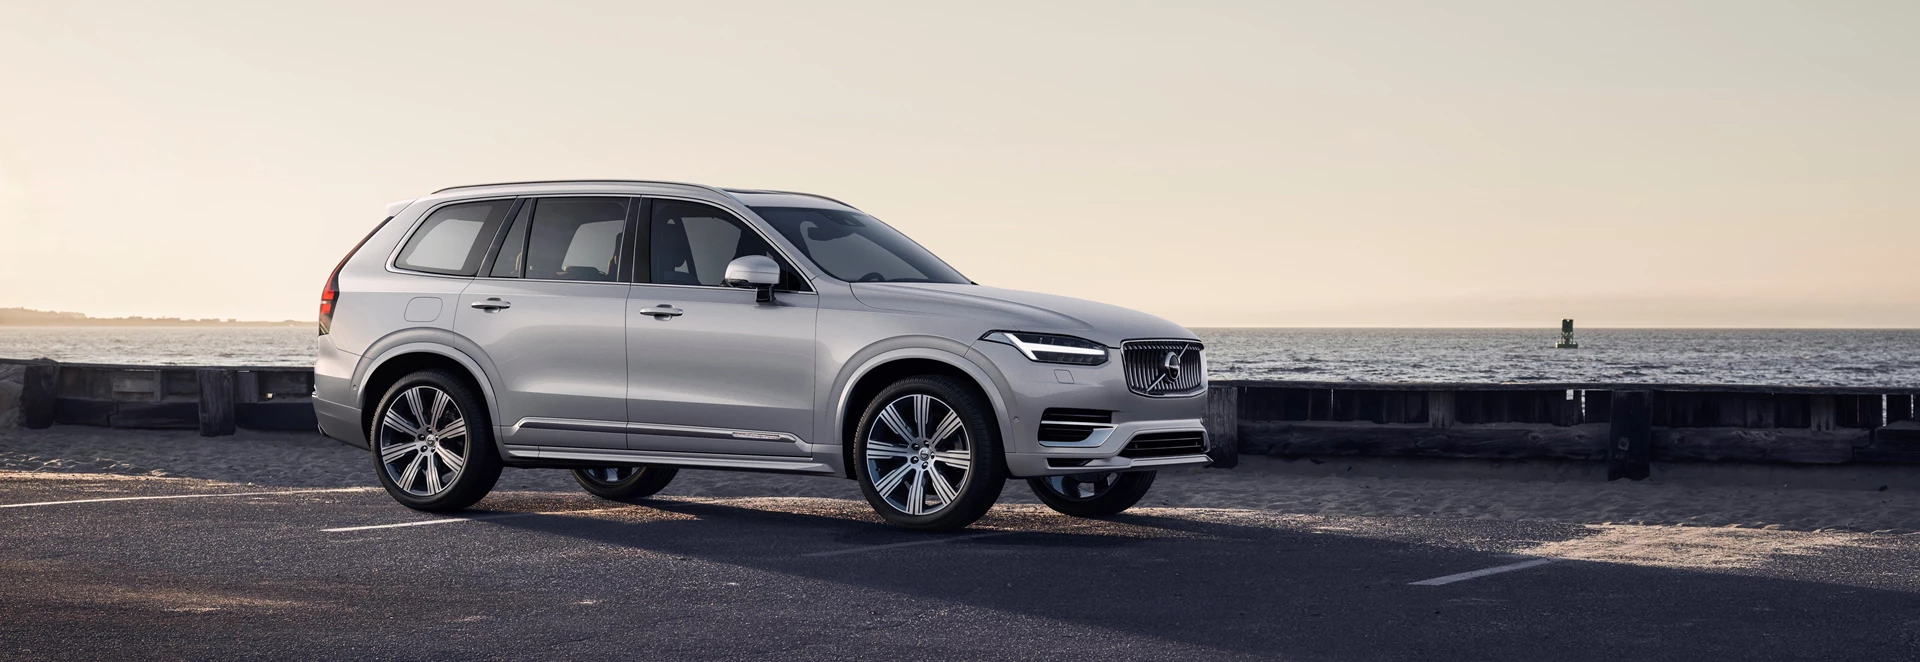 Covers taken off the updated Volvo XC90